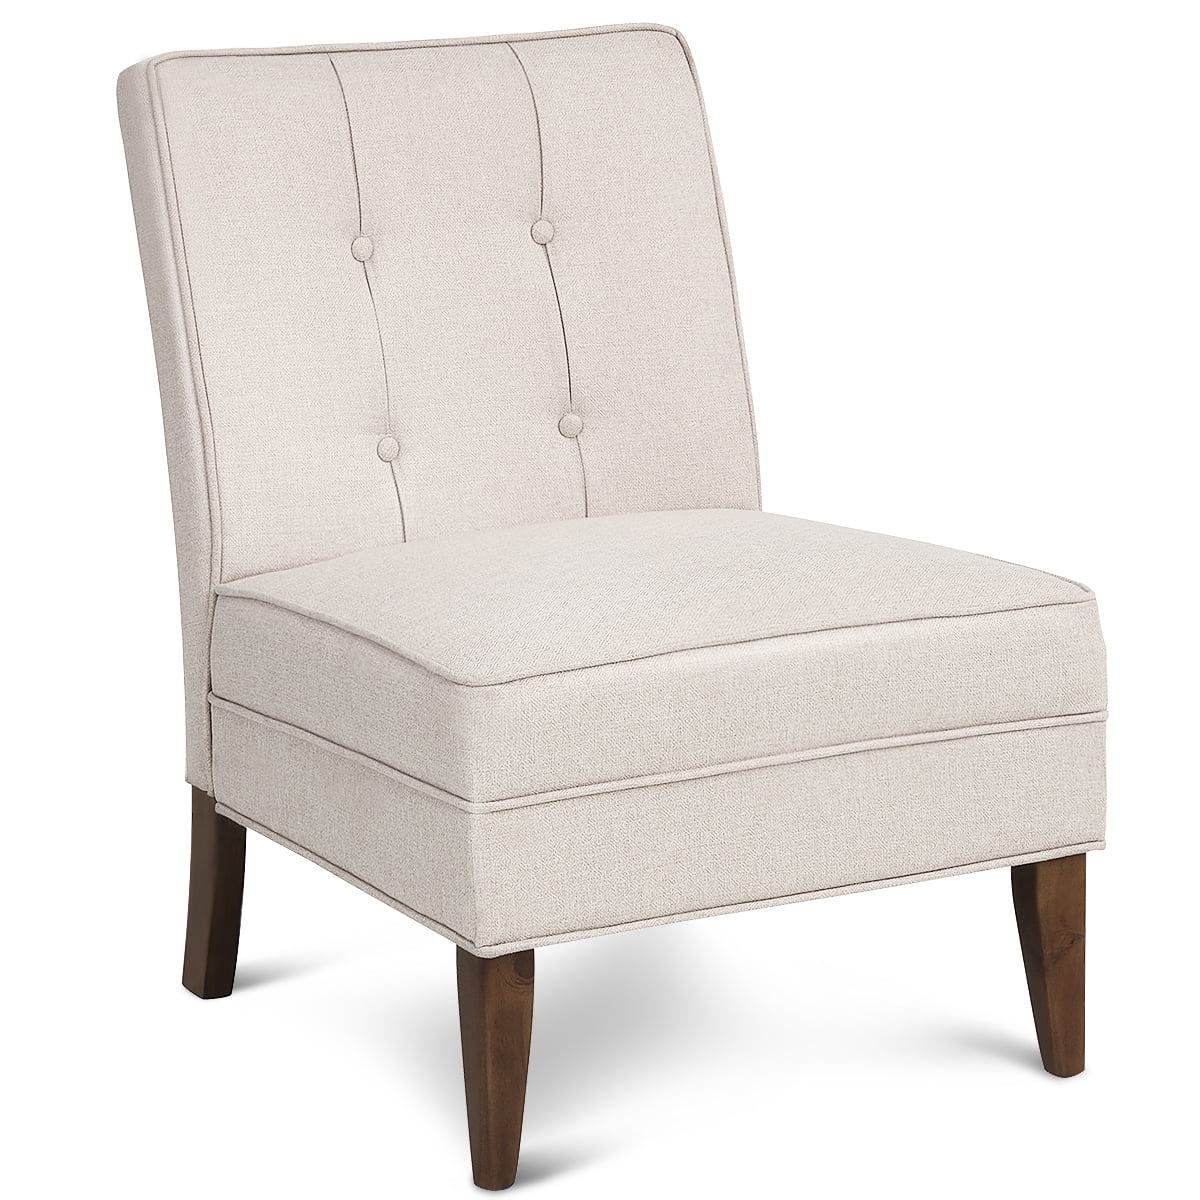 Costway Armless Accent Chair Tufted Leisure Chair Single ...